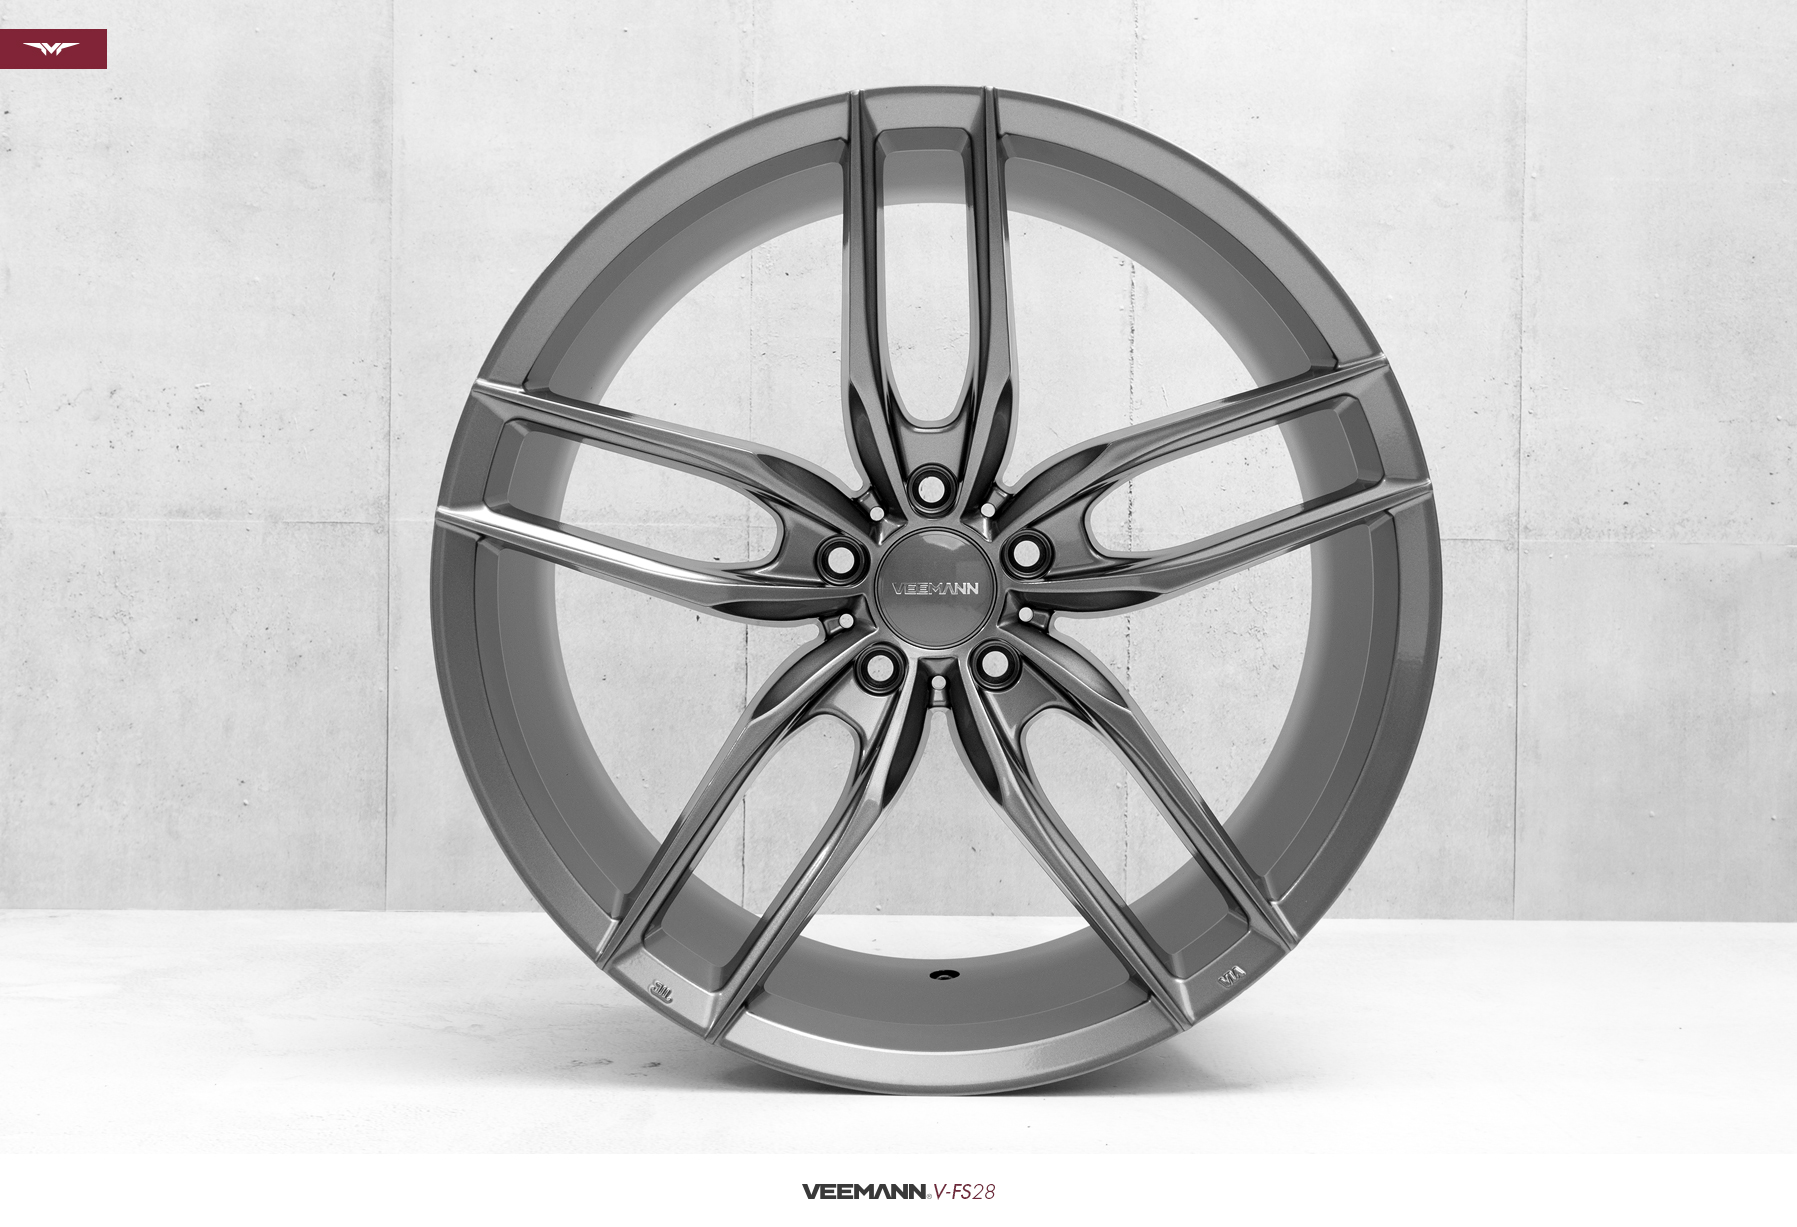 NEW 20" VEEMANN V-FS28 ALLOY WHEELS IN GLOSS GRAPHITE WITH DEEPER CONCAVE 10" REARS 5x112